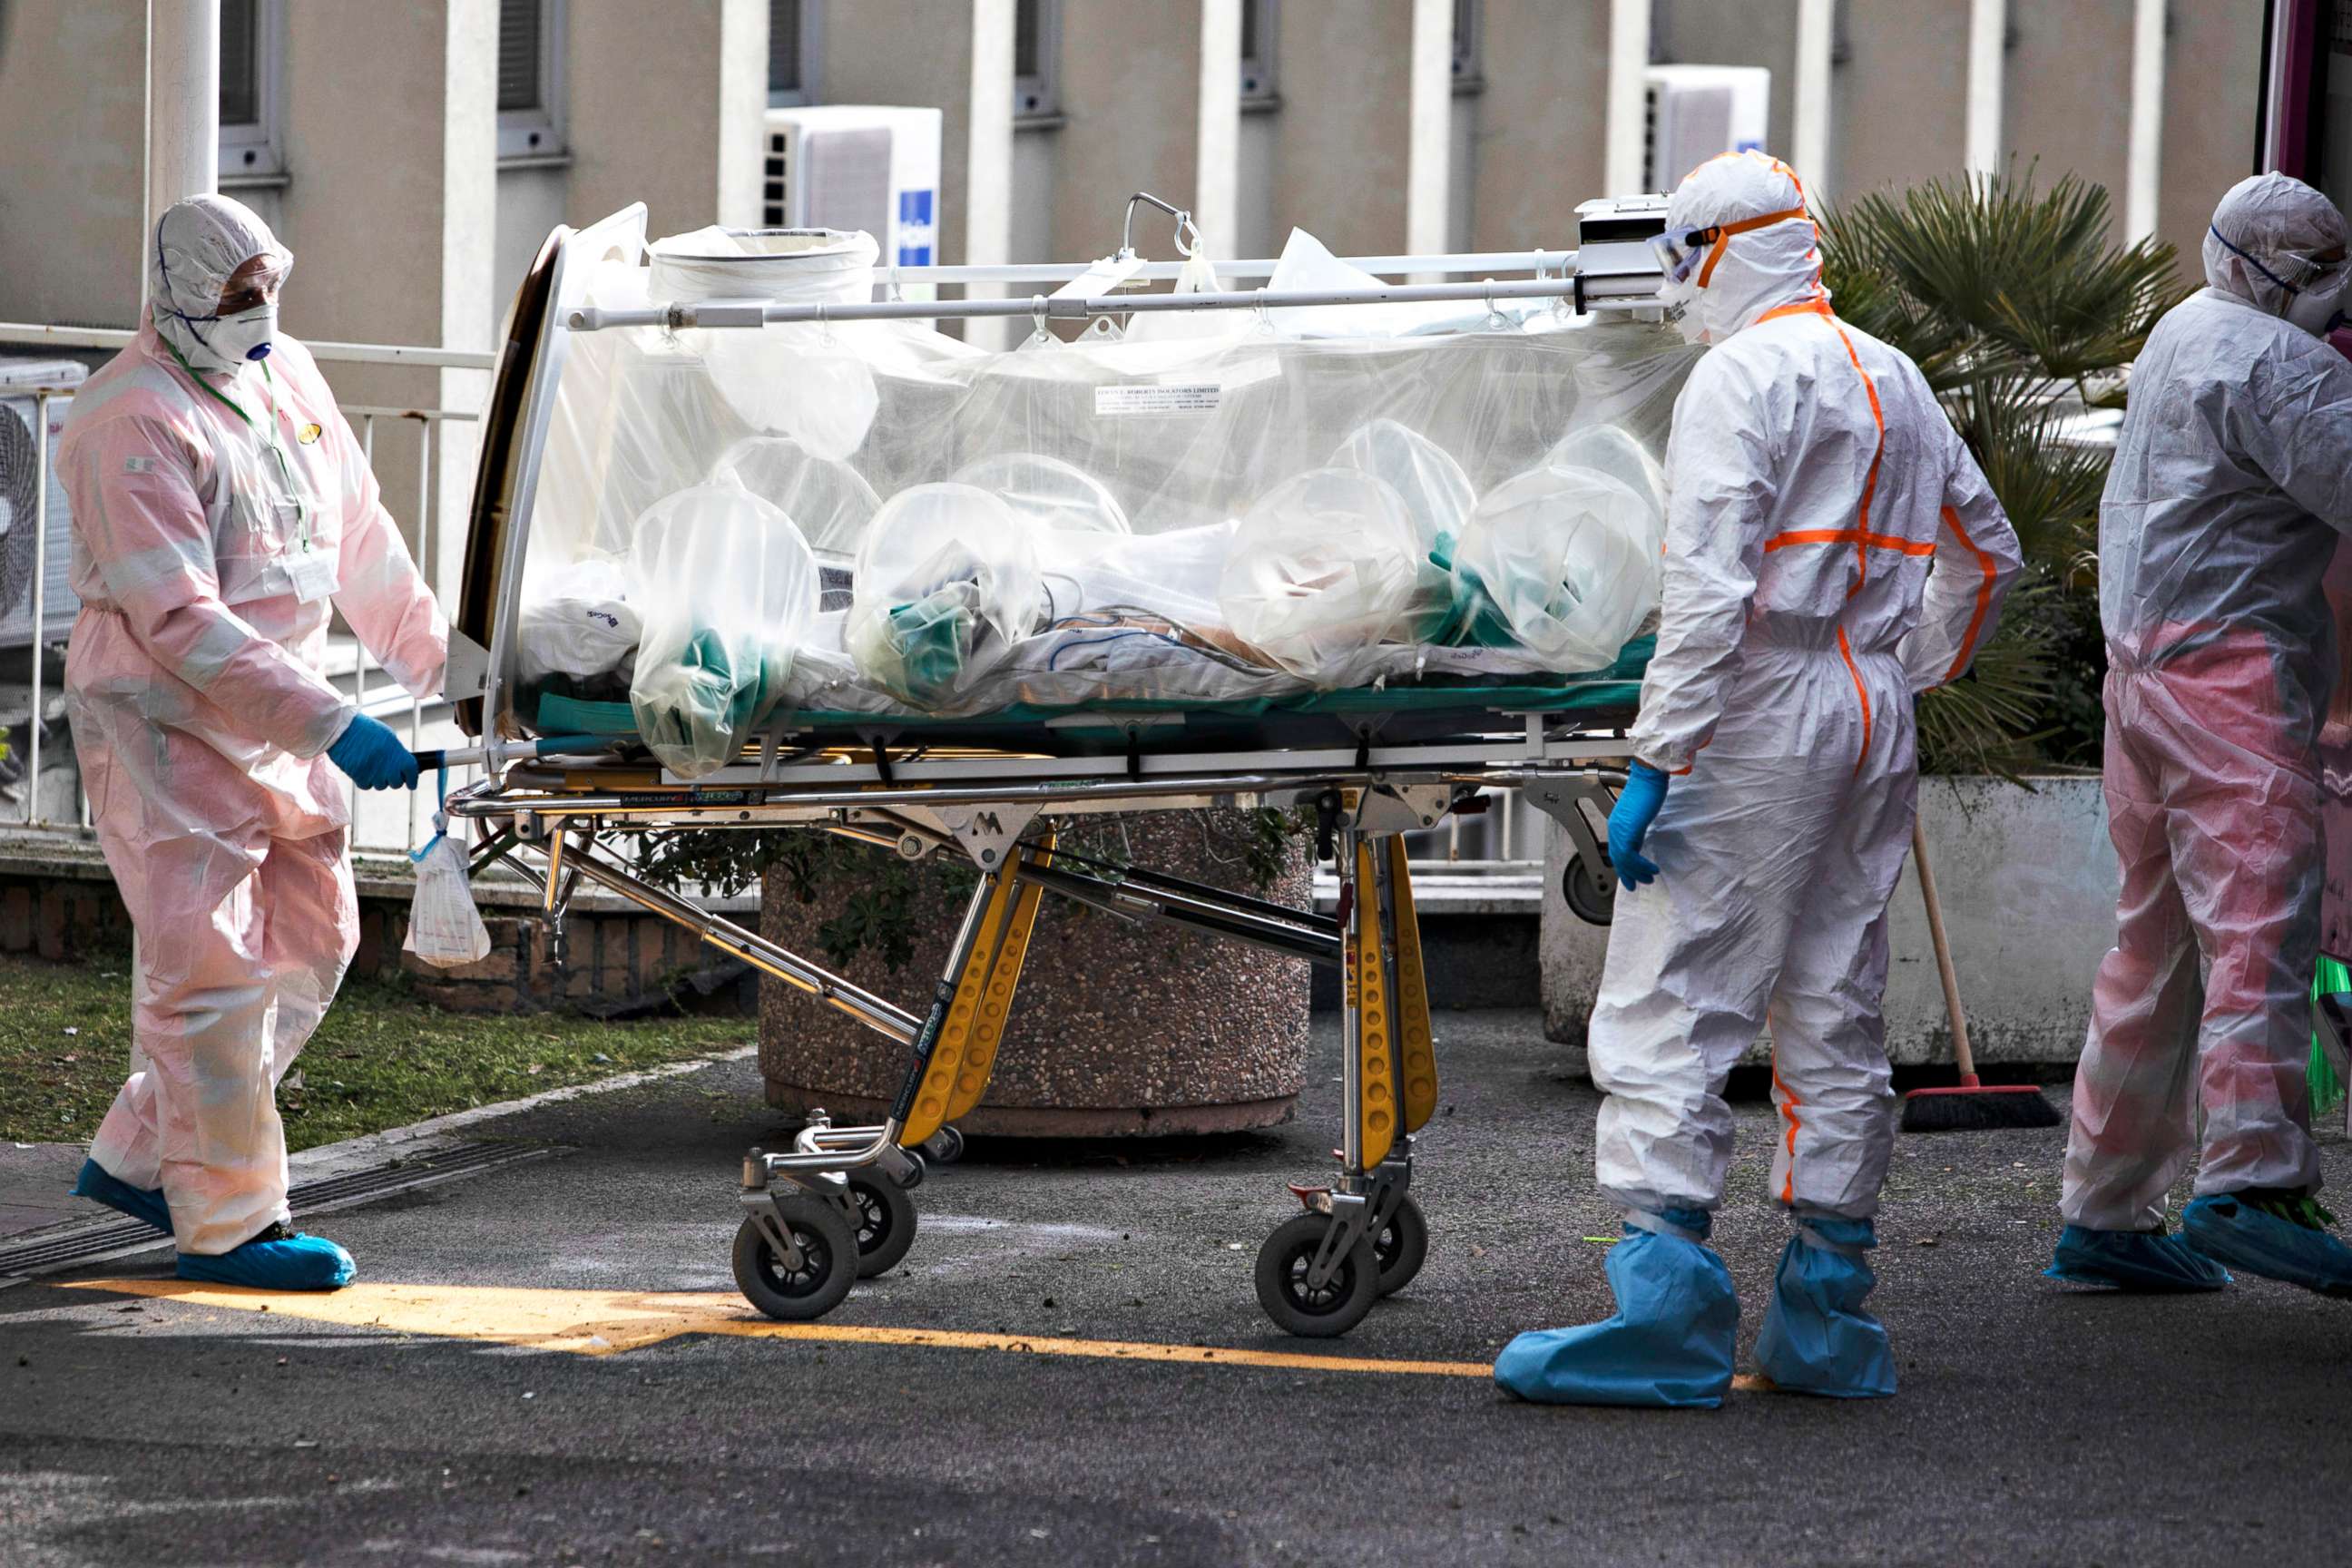 PHOTO: Paramedics transport a patient, suspected to have the coronavirus, to a hospital in Rome, March 17, 2020.